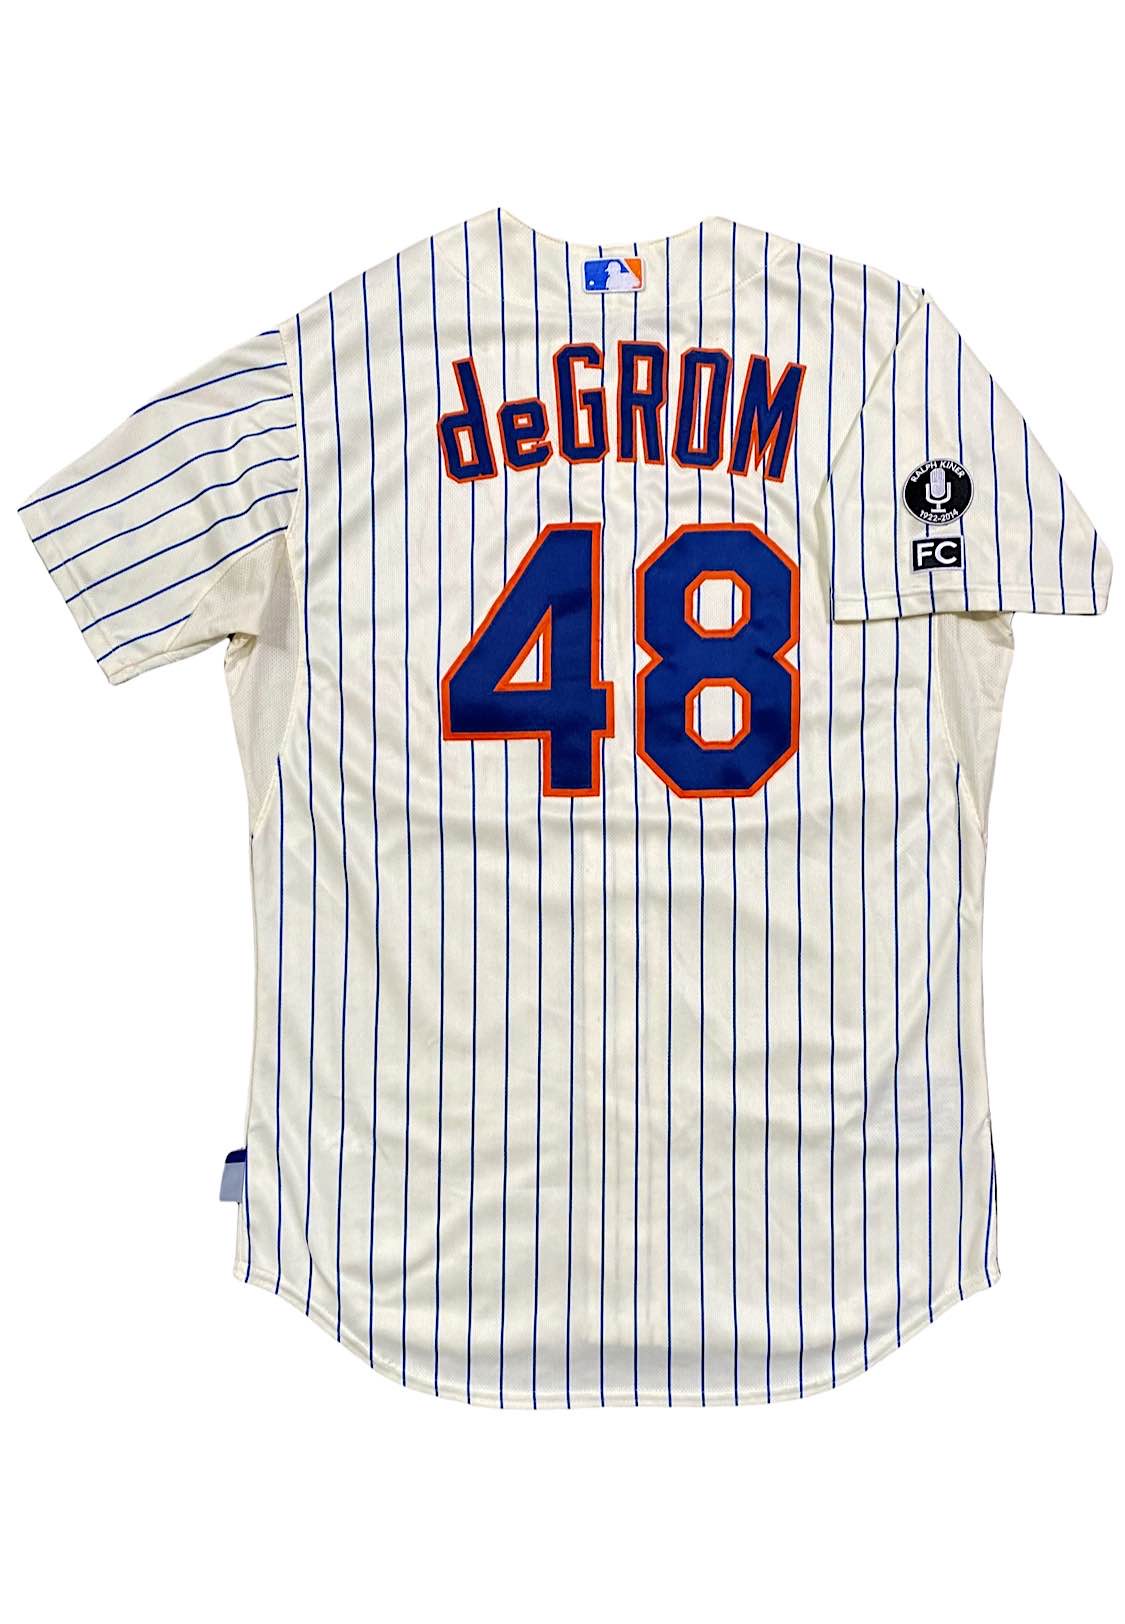 New York Mets 2018 Little League Classic Game-Used Jersey - Jacob deGrom  deGrom - 8/19/2018